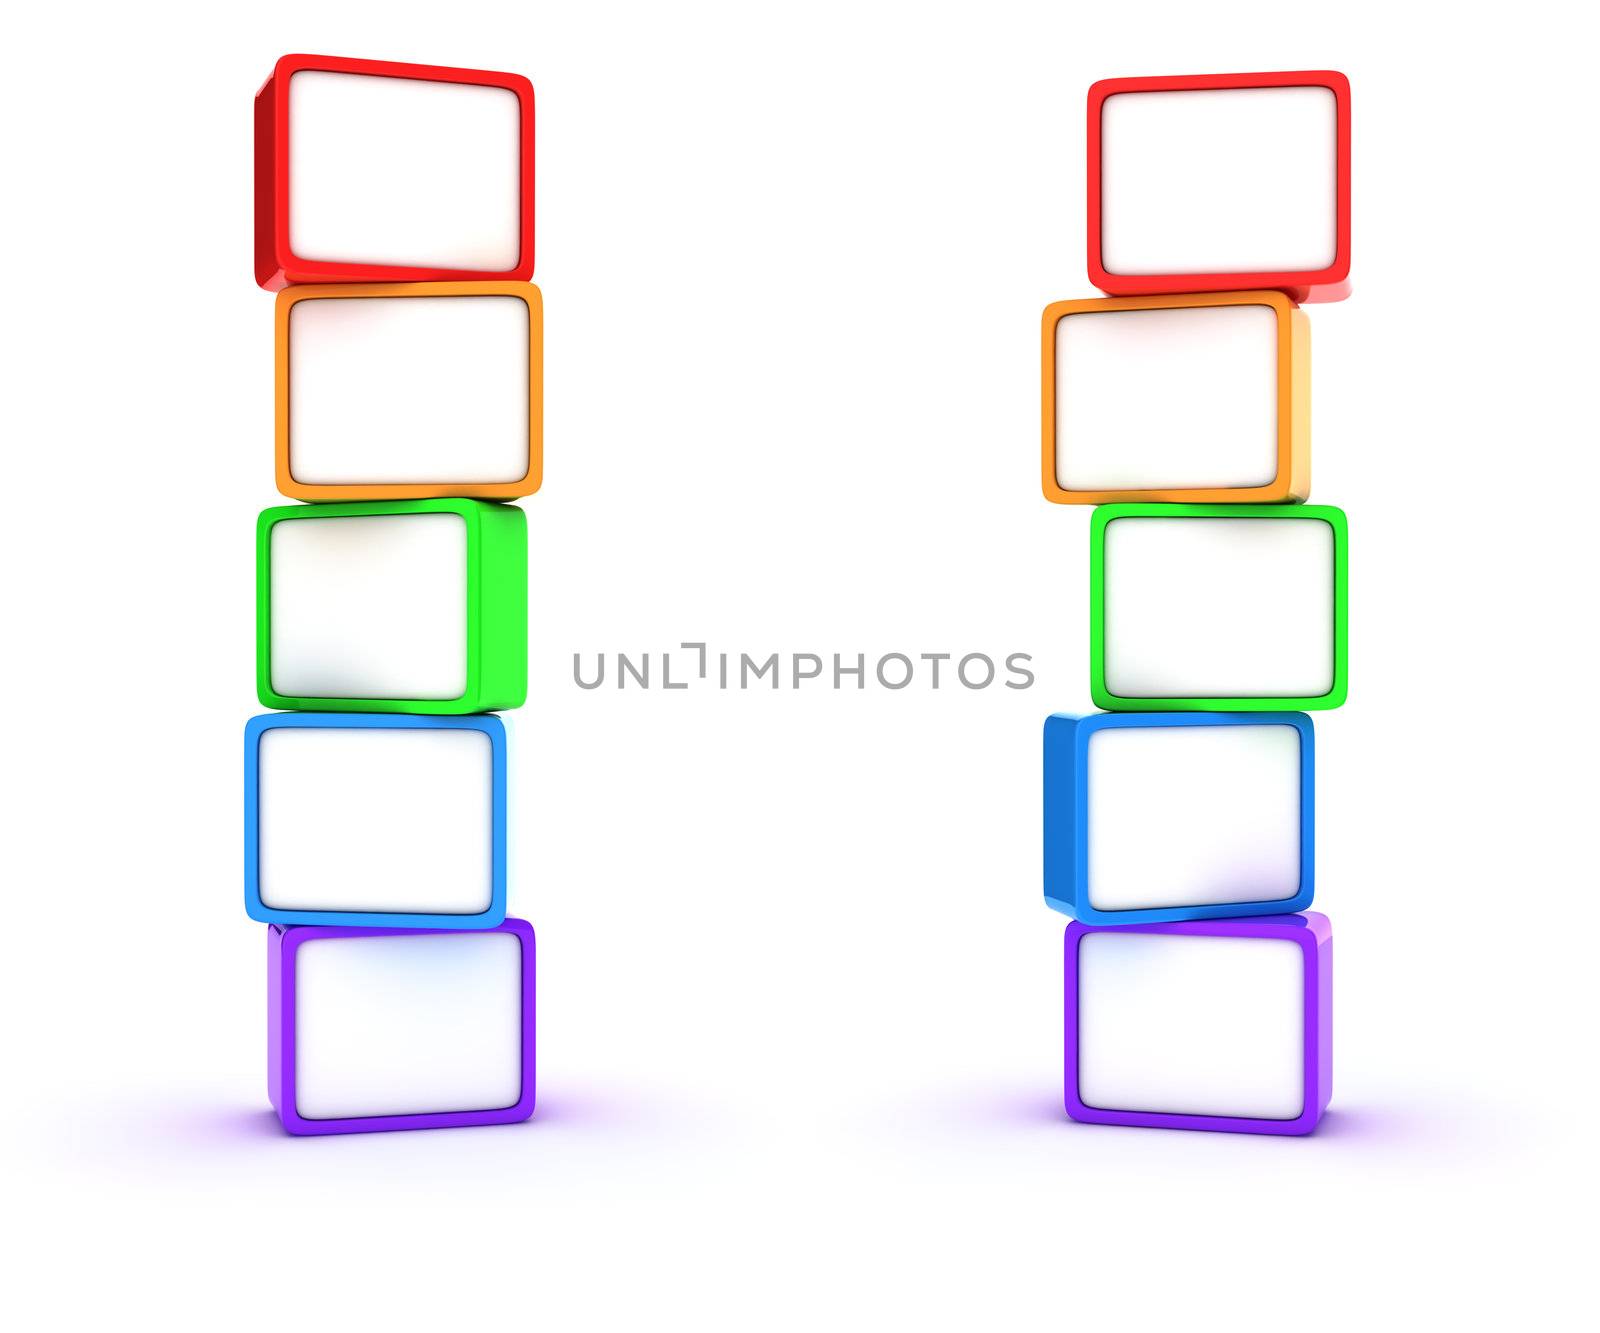 Two columns of multicolored cubes